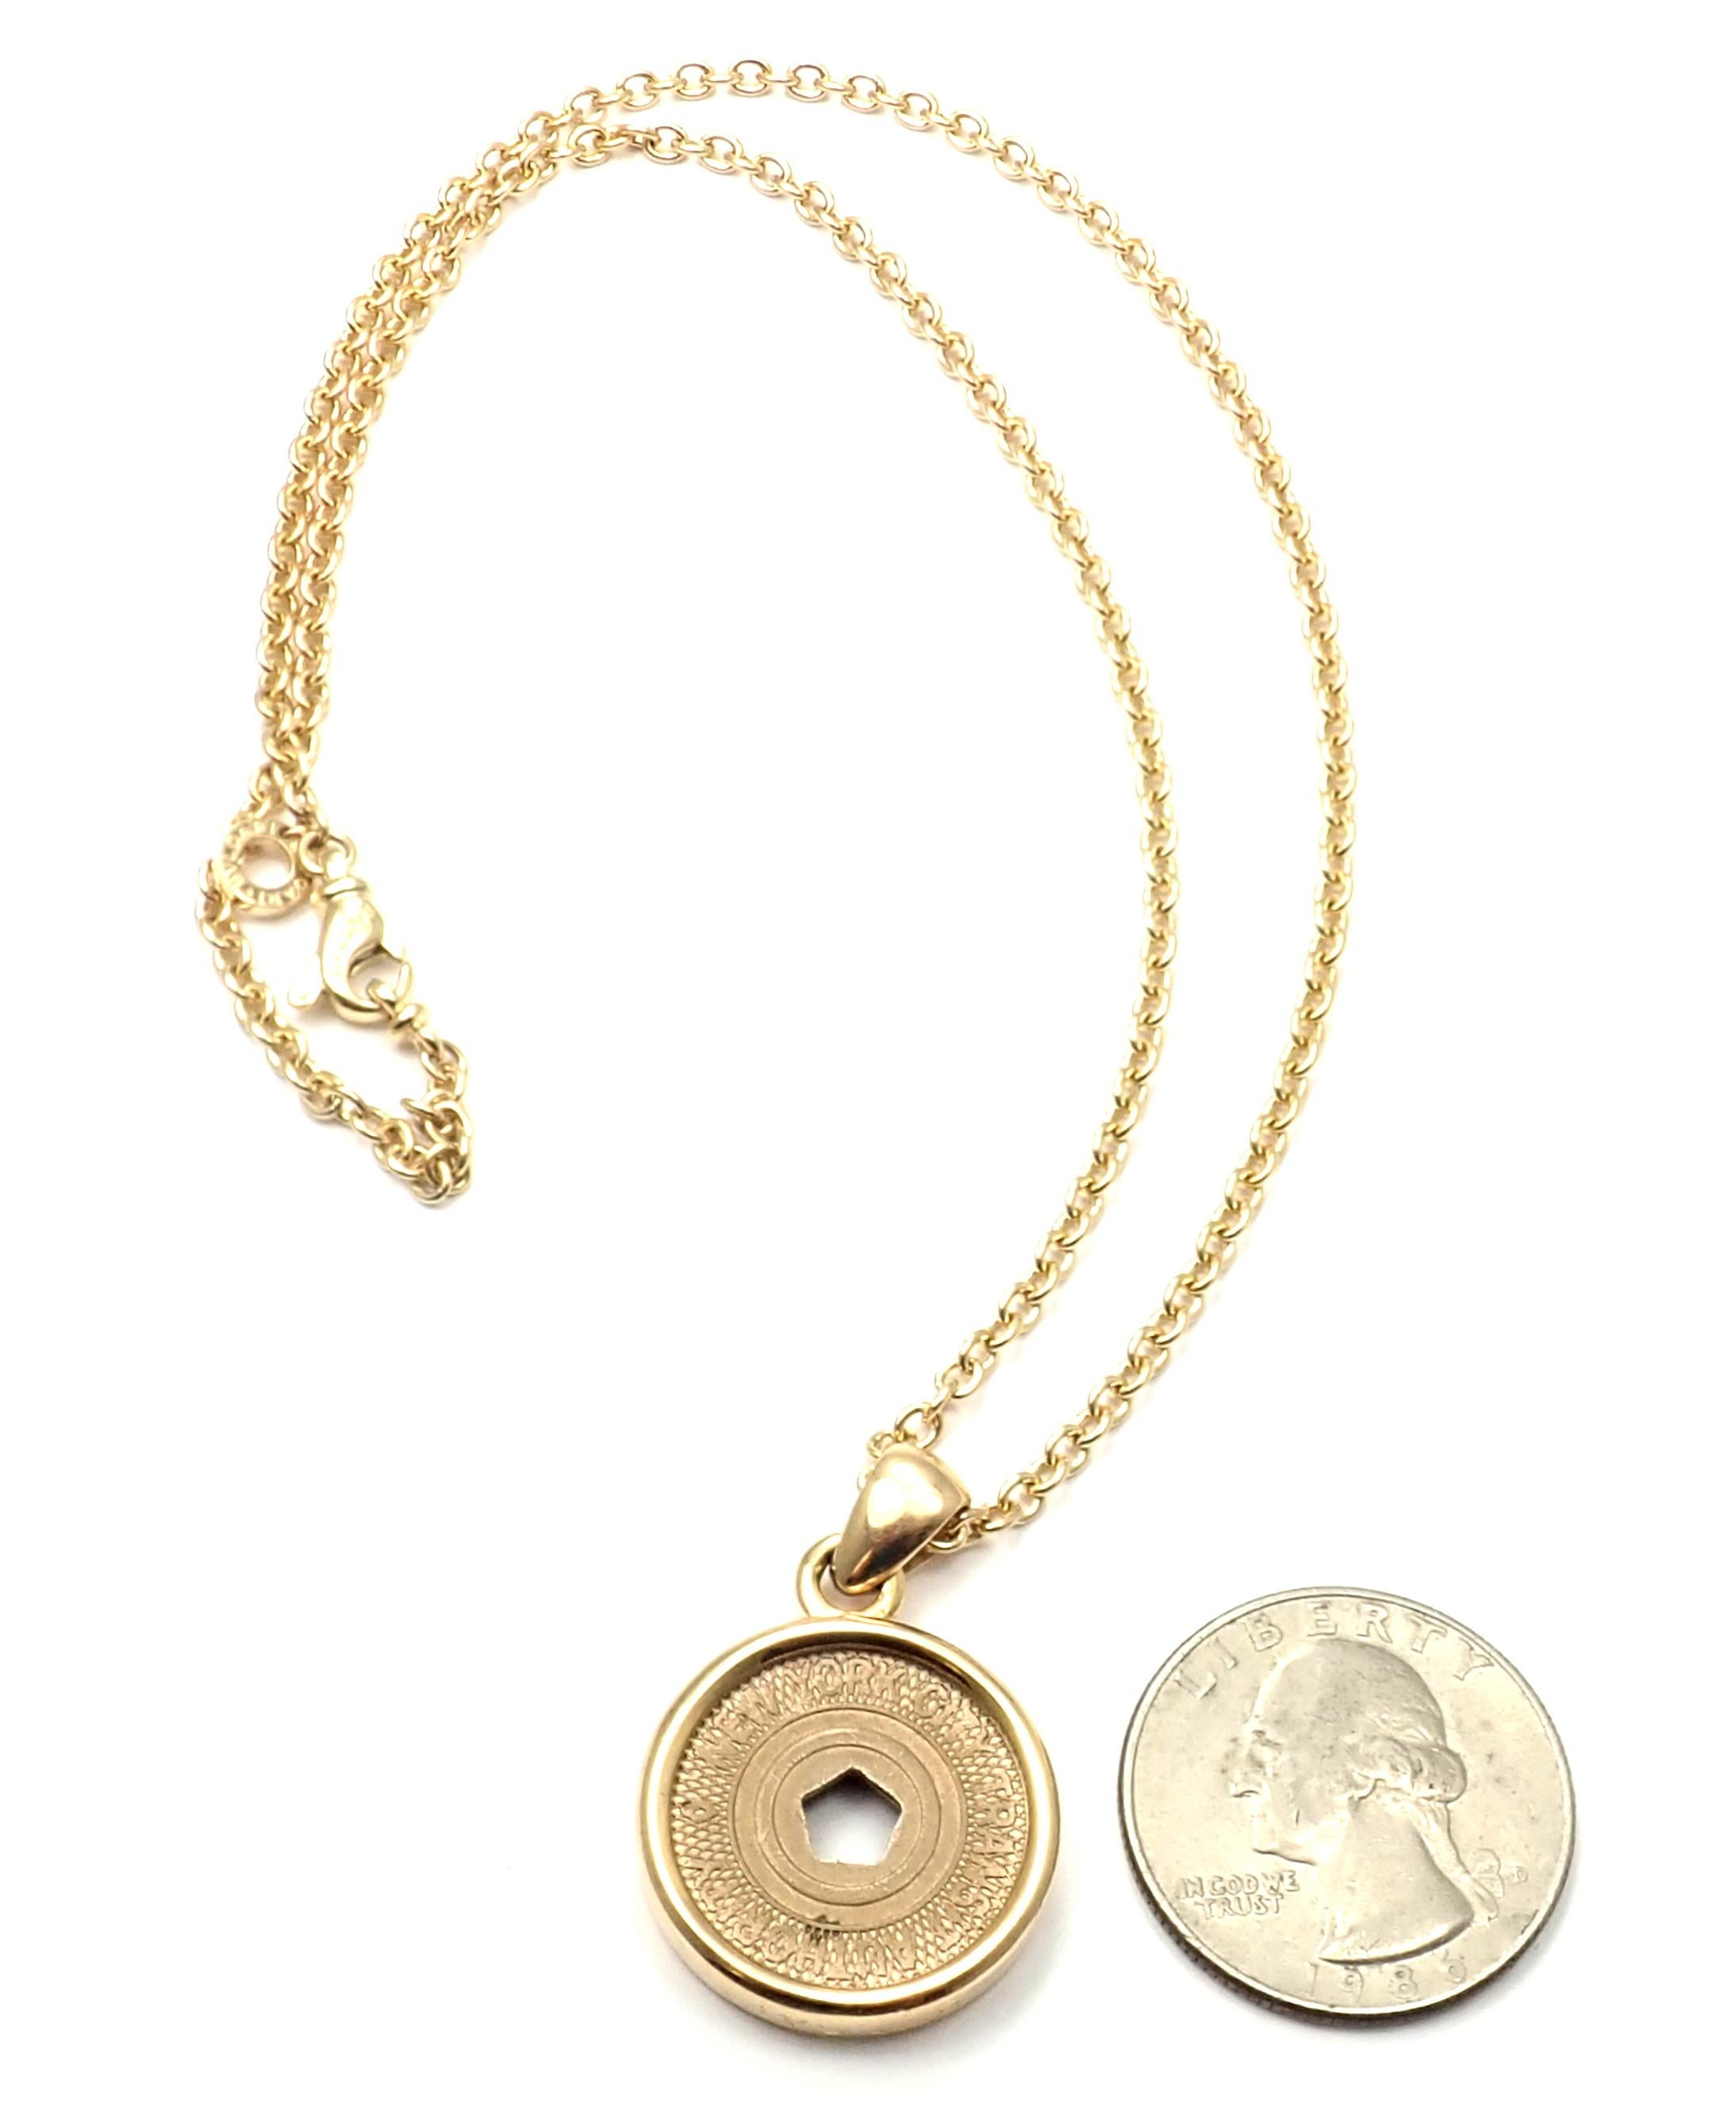 Bulgari NYC Subway Token Limited Edition Yellow Gold Pendant Necklace For Sale 4